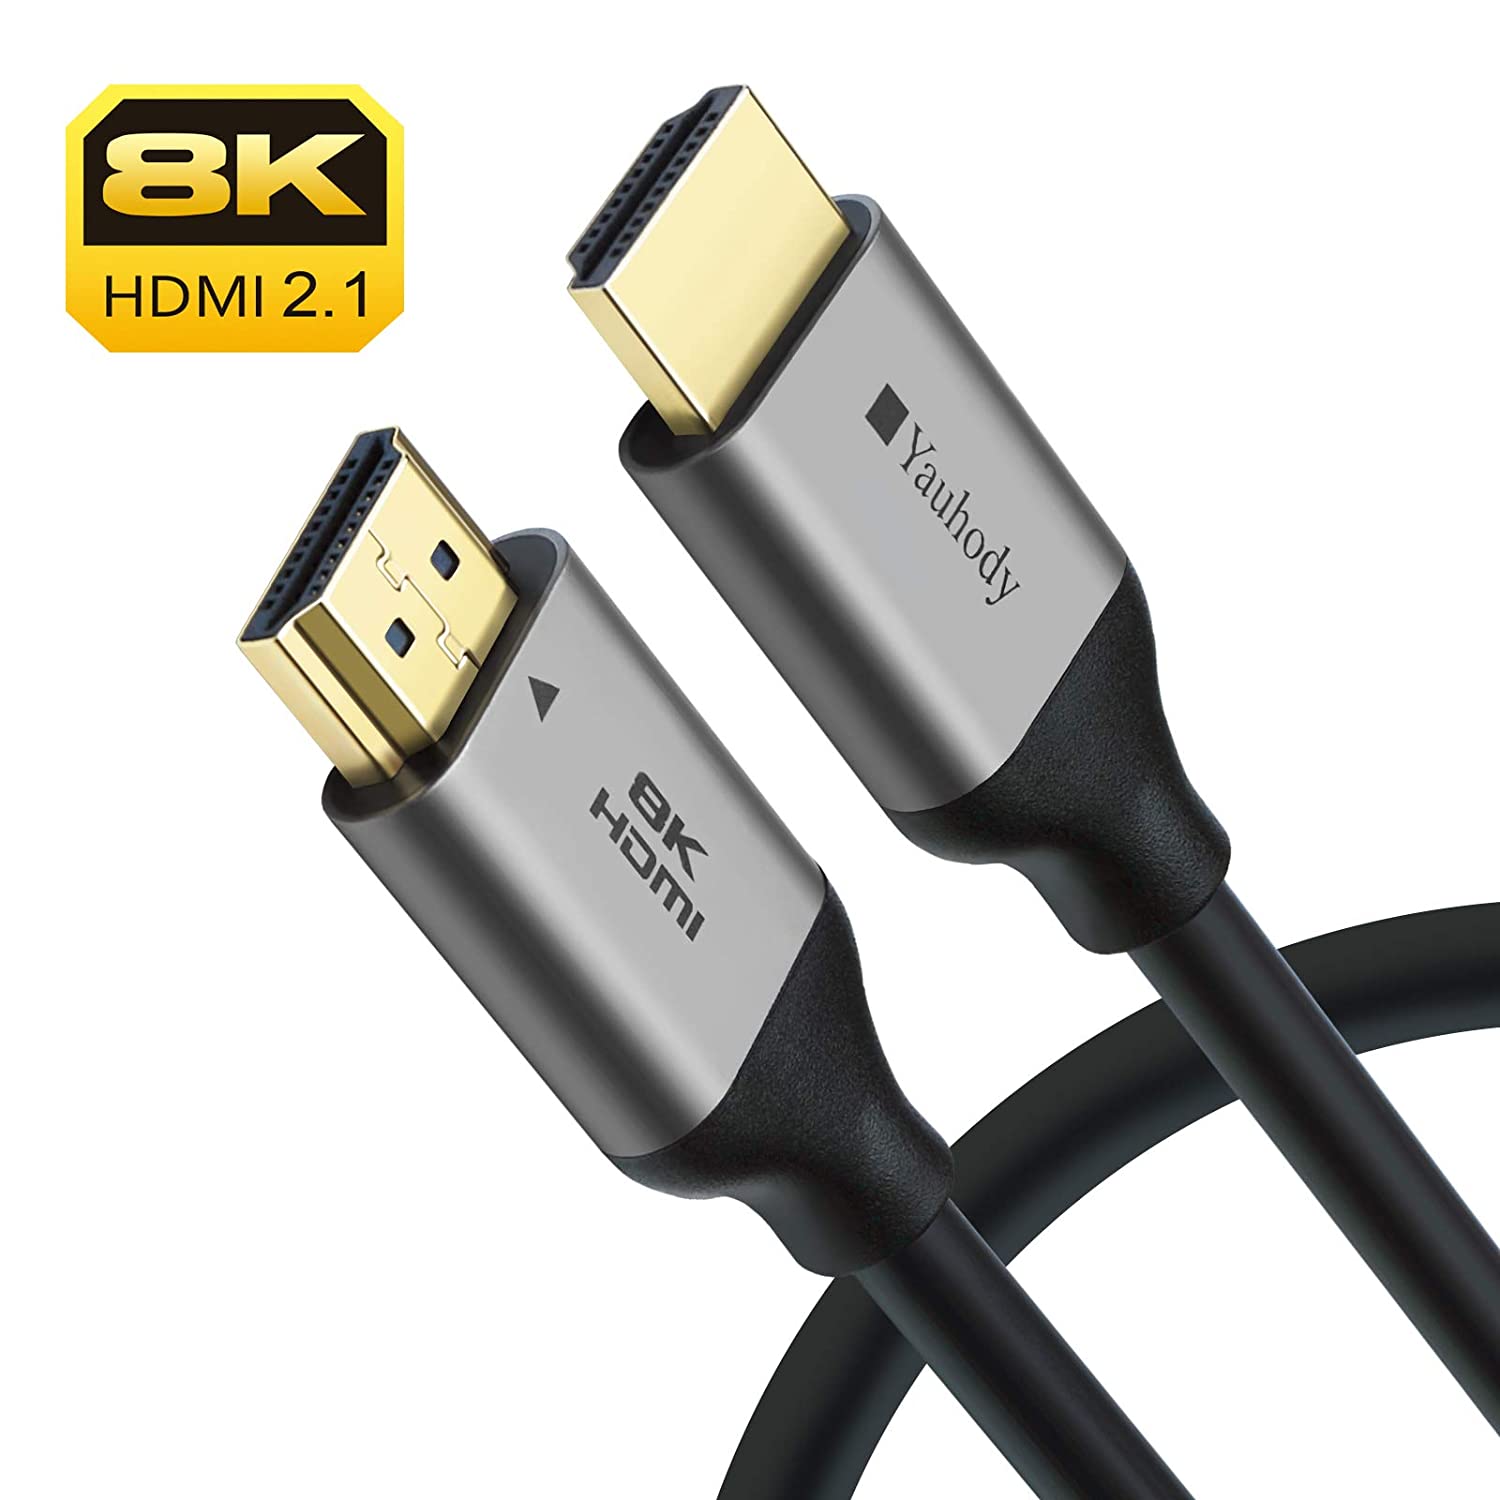 BYEASY HDMI Cable, 2M 8K@60Hz HDMI 2.1 Cable, 4K@120Hz, eARC, Dolby, 3D,  Ethernet, Compatible with all HDMI devices PC/TV/HDTV/Blu-ray/Game console